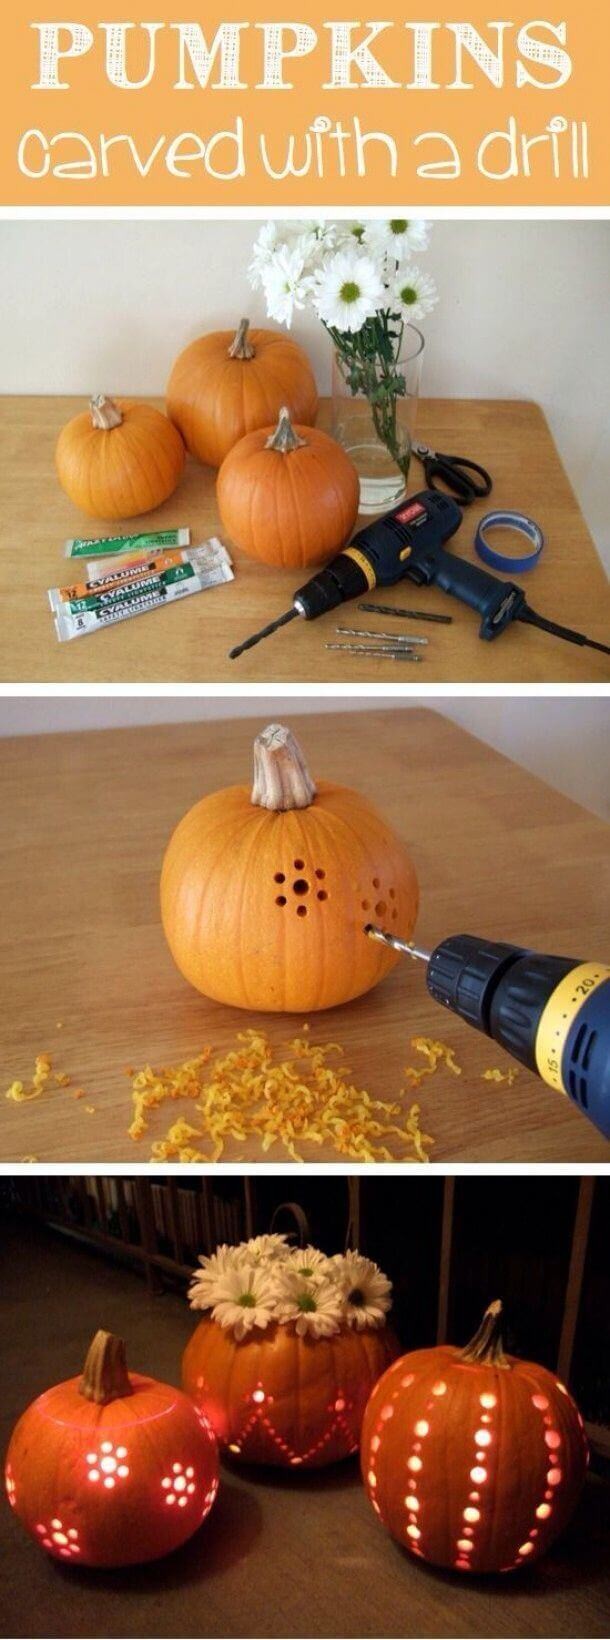 51+ Creative Pumpkin Carving Ideas You Should Try This Halloween